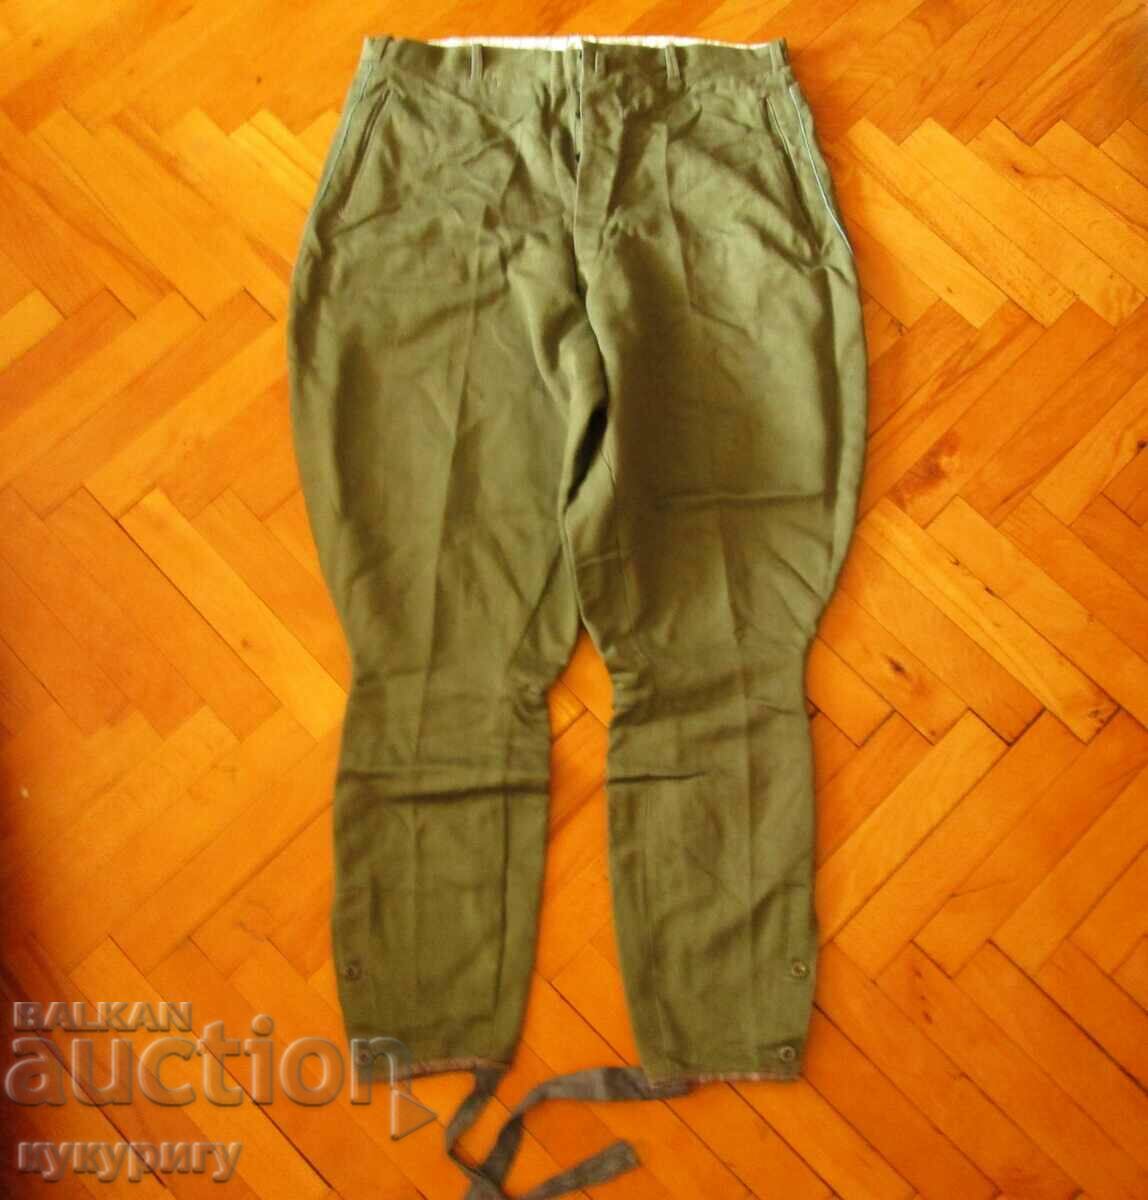 Old Air Force summer combat military uniform officer's breeches